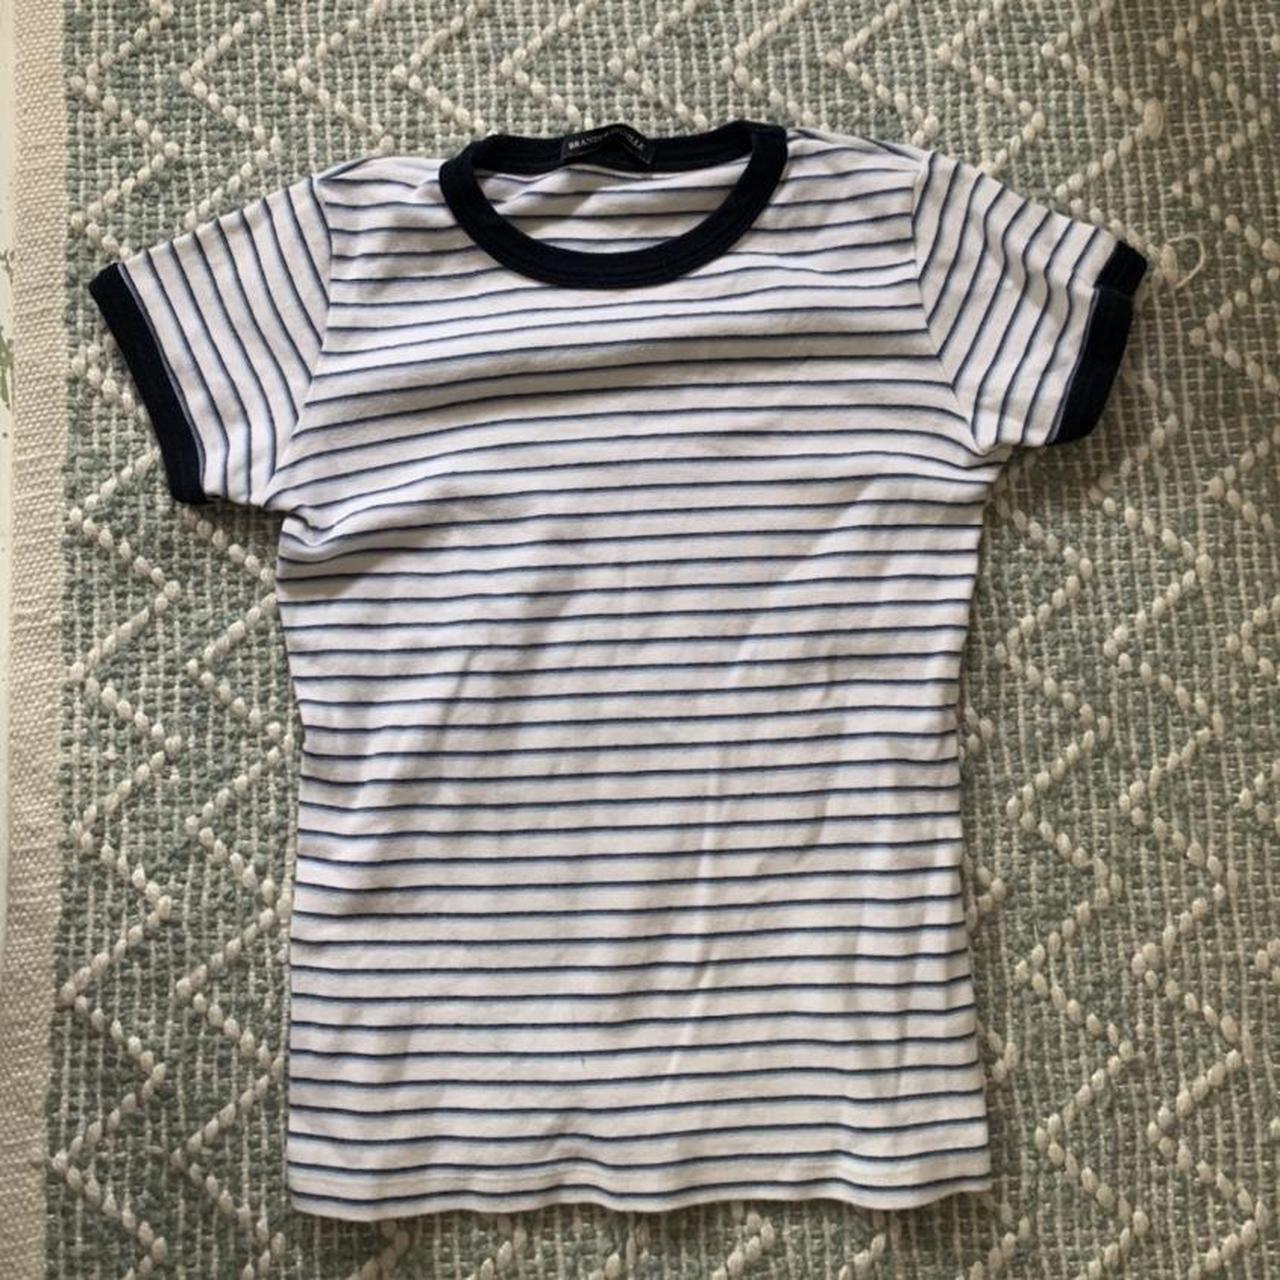 BRANDY MELVILLE baby blue, navy and white striped... - Depop